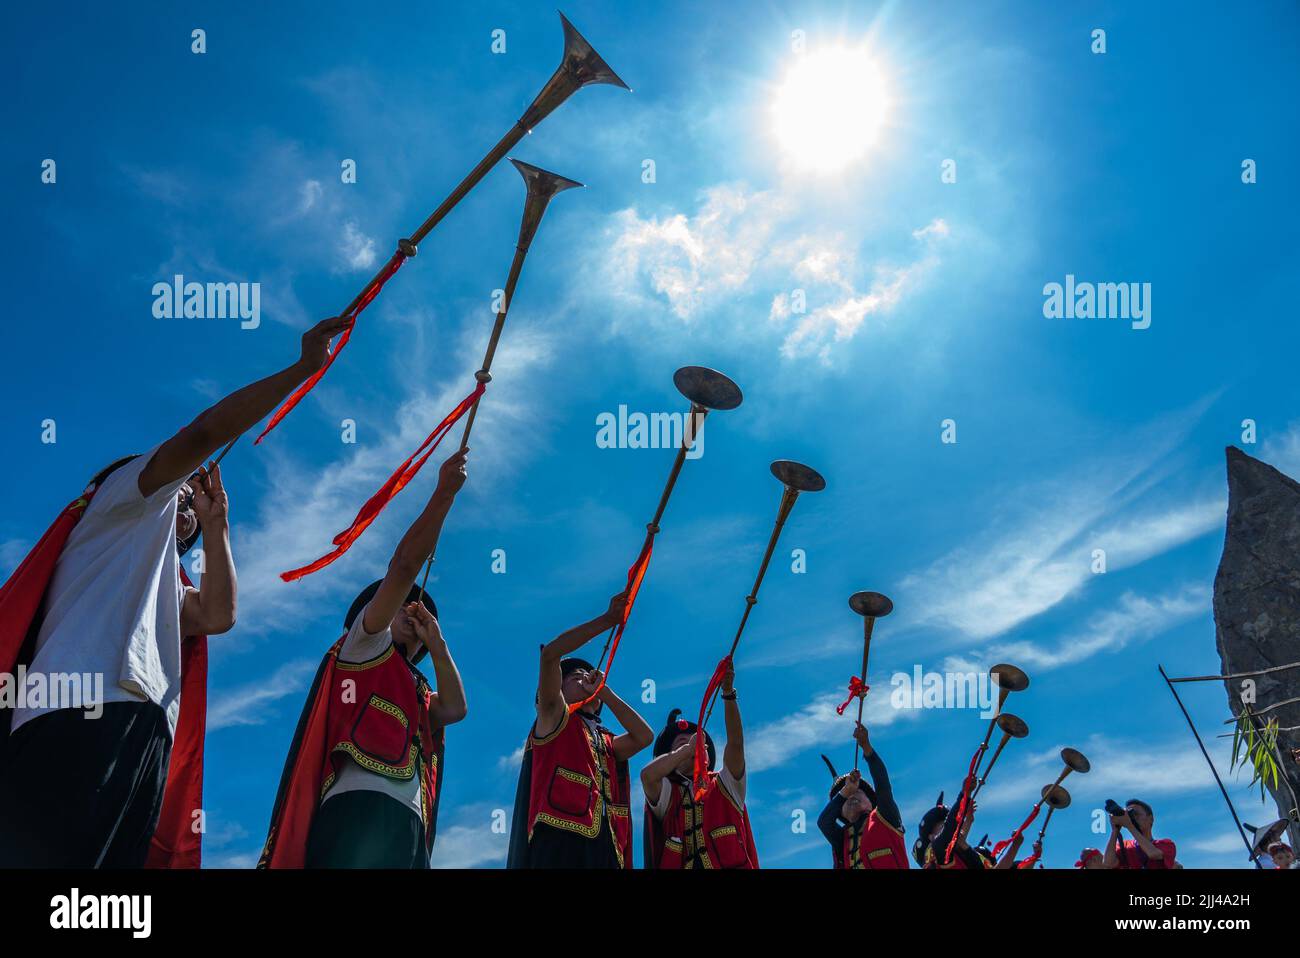 BIJIE, CHINA - JULY 22, 2022 - People of the Yi ethnic group take part in a fire lighting ceremony during the Torch Festival at Baili Azalea Managemen Stock Photo